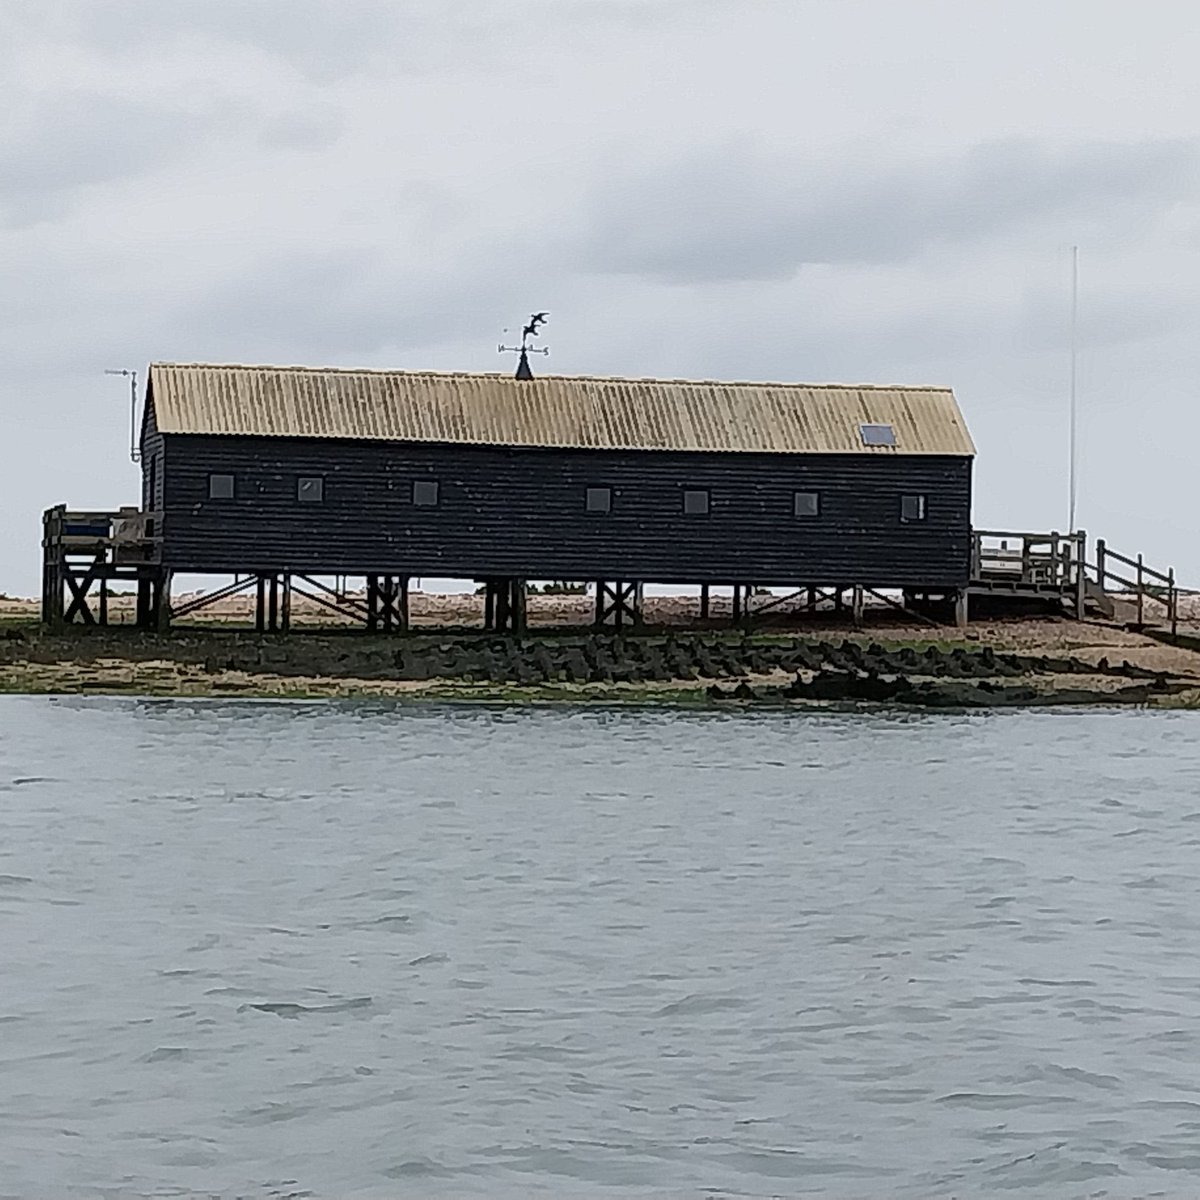 Off the coast of Mersea Island, there is a long black timber shed hovering above the waterline. Find out more about this local landmark on the latest episode of Essex By The Sea Podcast. Available now on your favourite podcast app. podfollow.com/essexbythesea